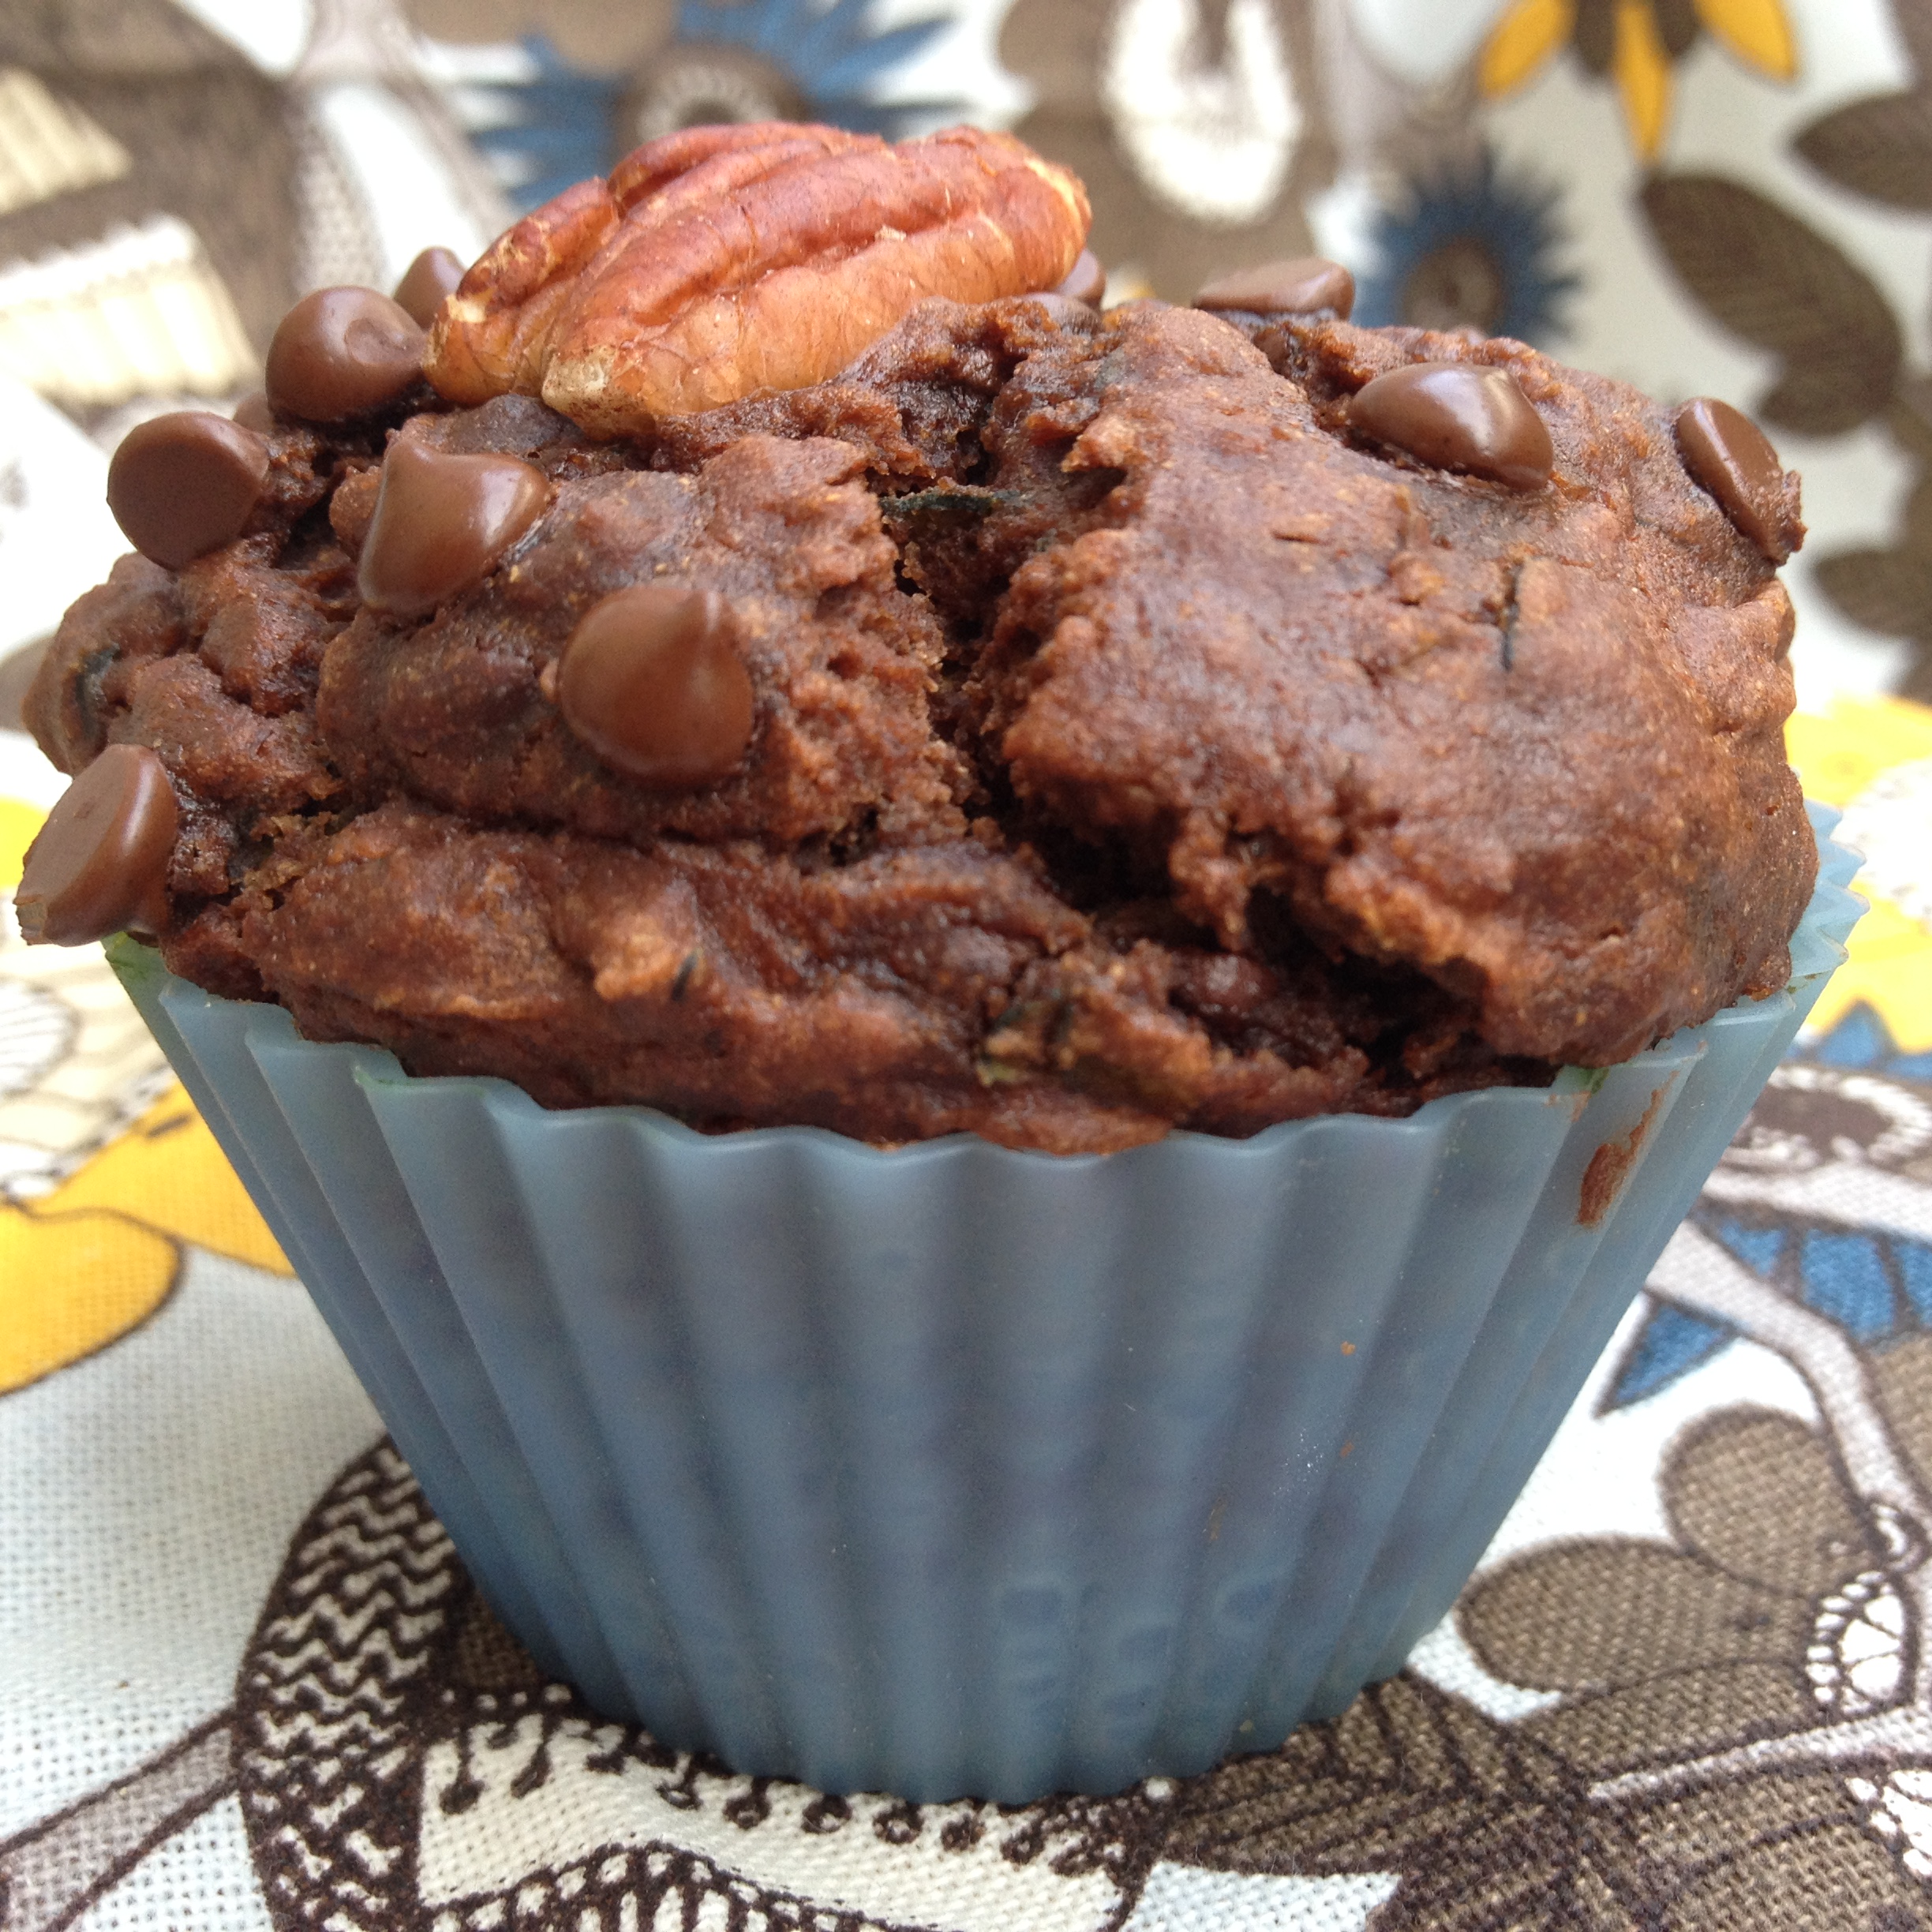 Review #2 – Oil-free Chocolate Zucchini Muffins (from the Oh She Glows Cookbook)